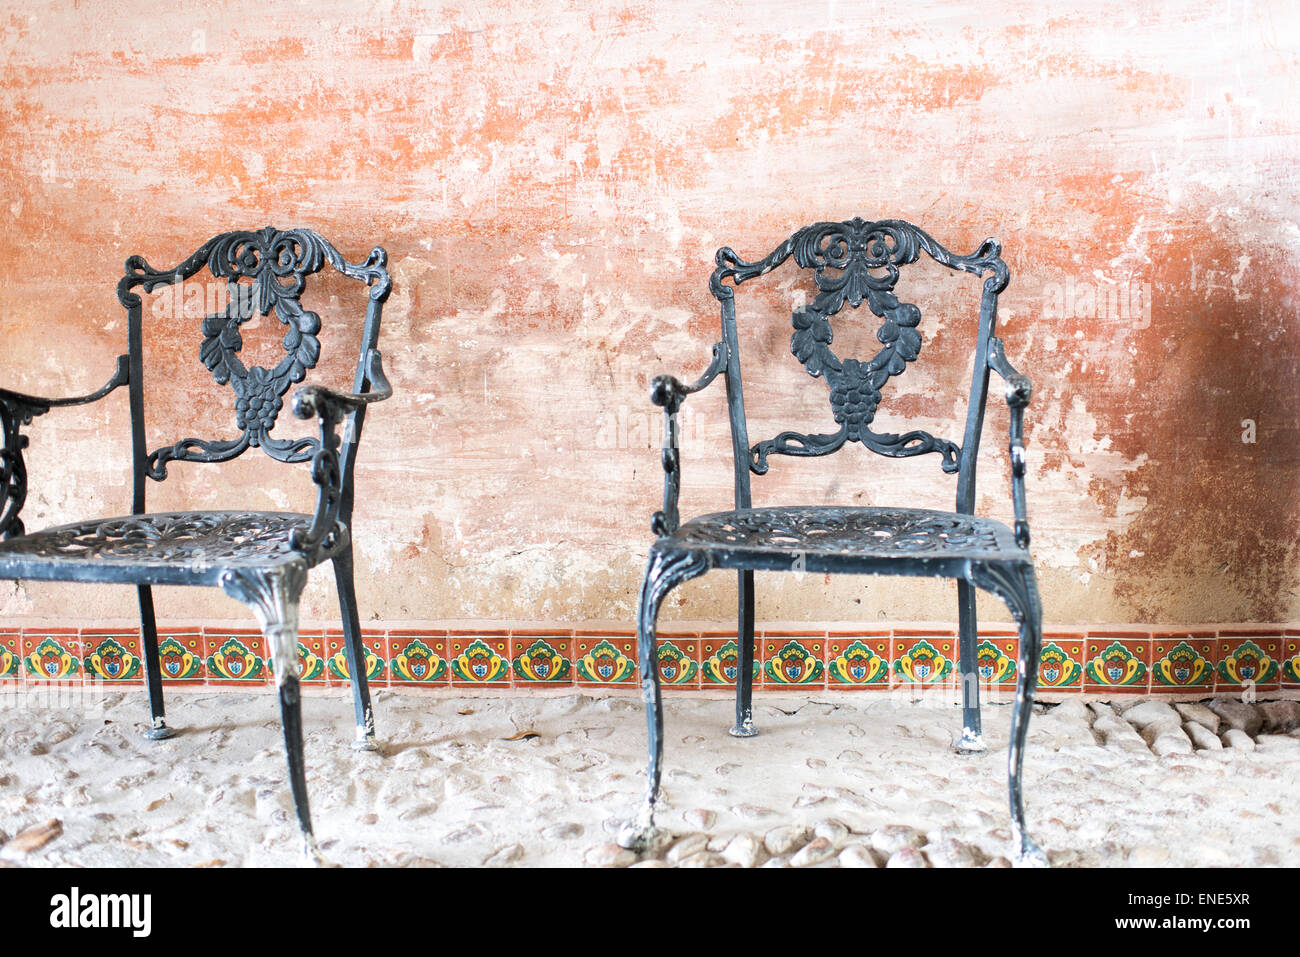 Two ornate iron chairs on patio at Hacienda Las Trancas in Mexico Stock Photo